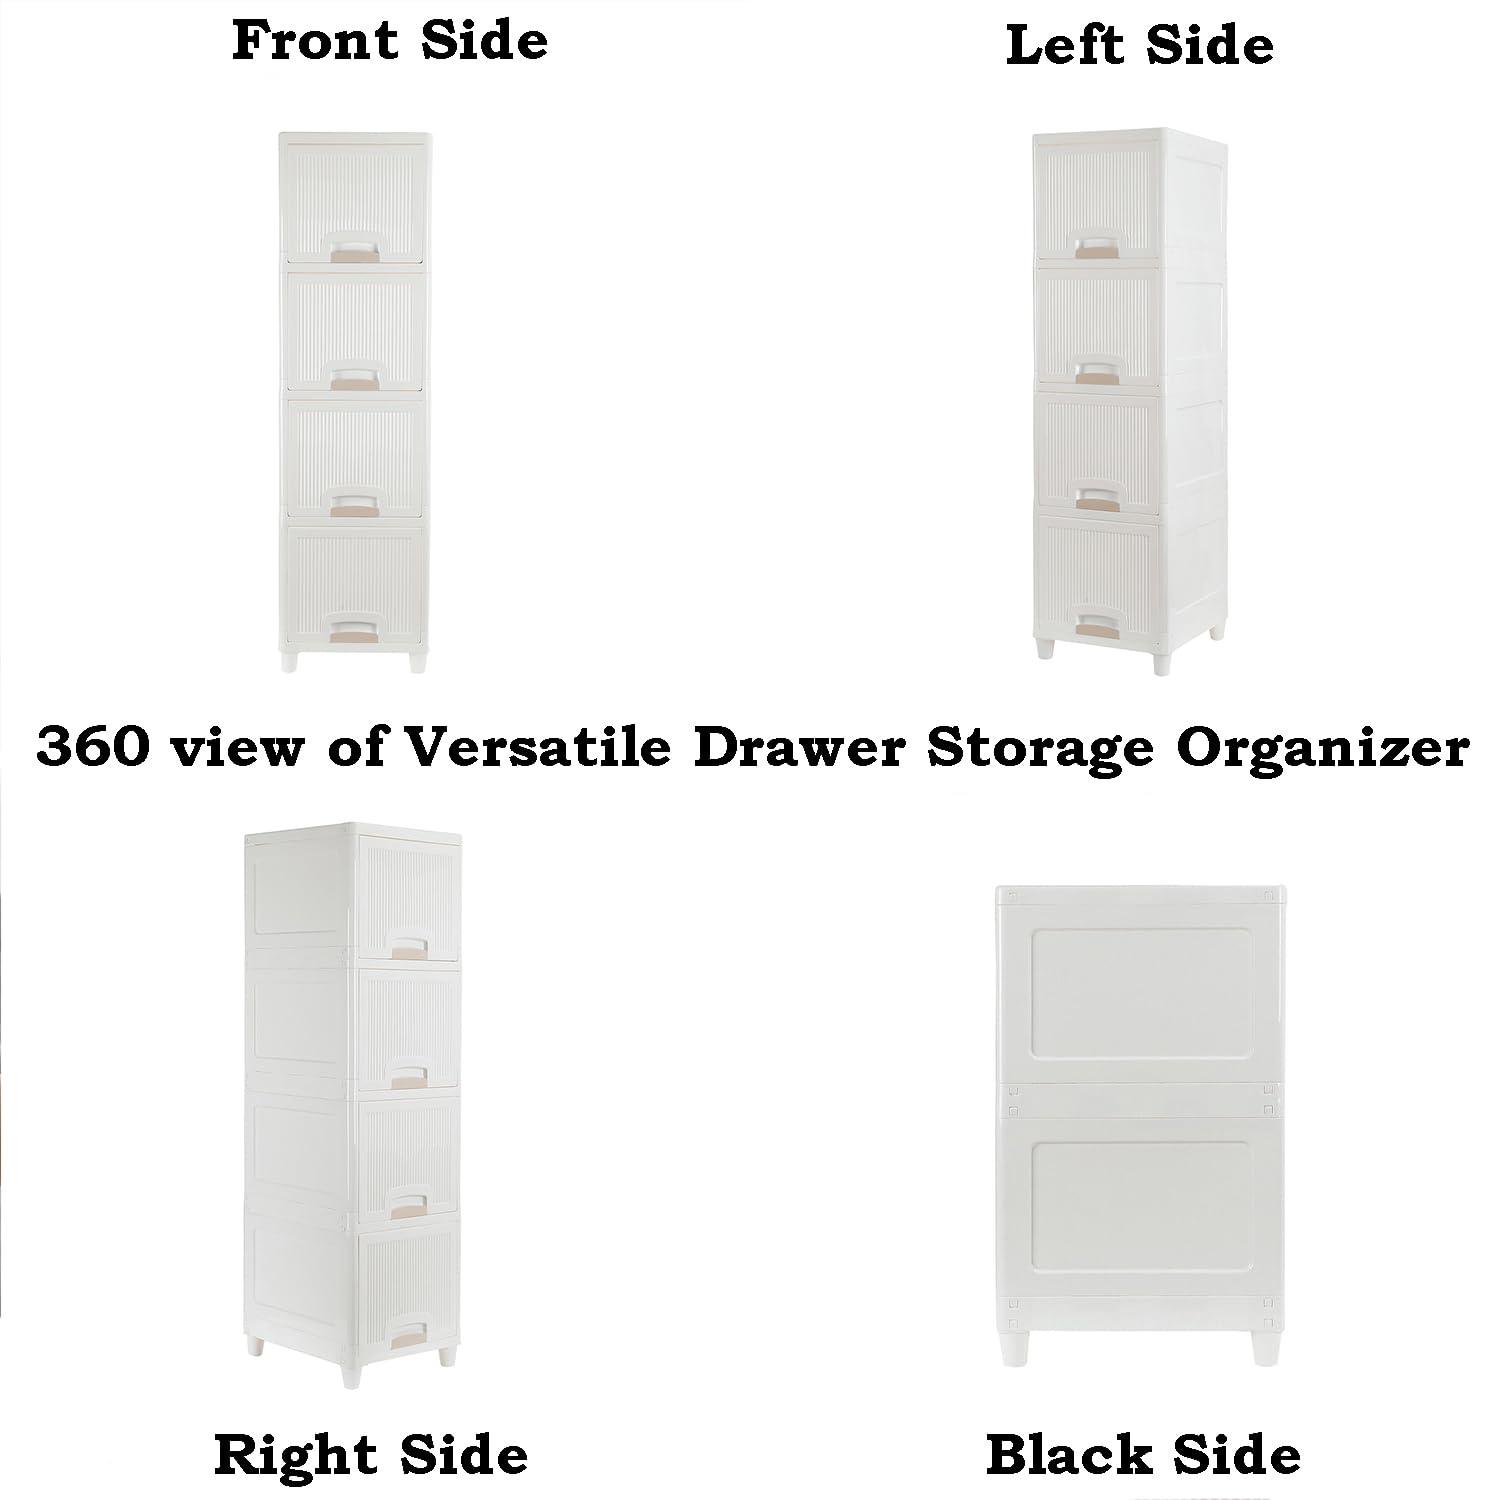 Multi Units Plastic Cupboard For Clothes Plastic Cabinet For Storage Foldable Wardrobe For Clothes Plastic Cloth Rack For Storage Clothes Storage Cabinet Plastic Modular Drawer Storage Box,White - instor360.com